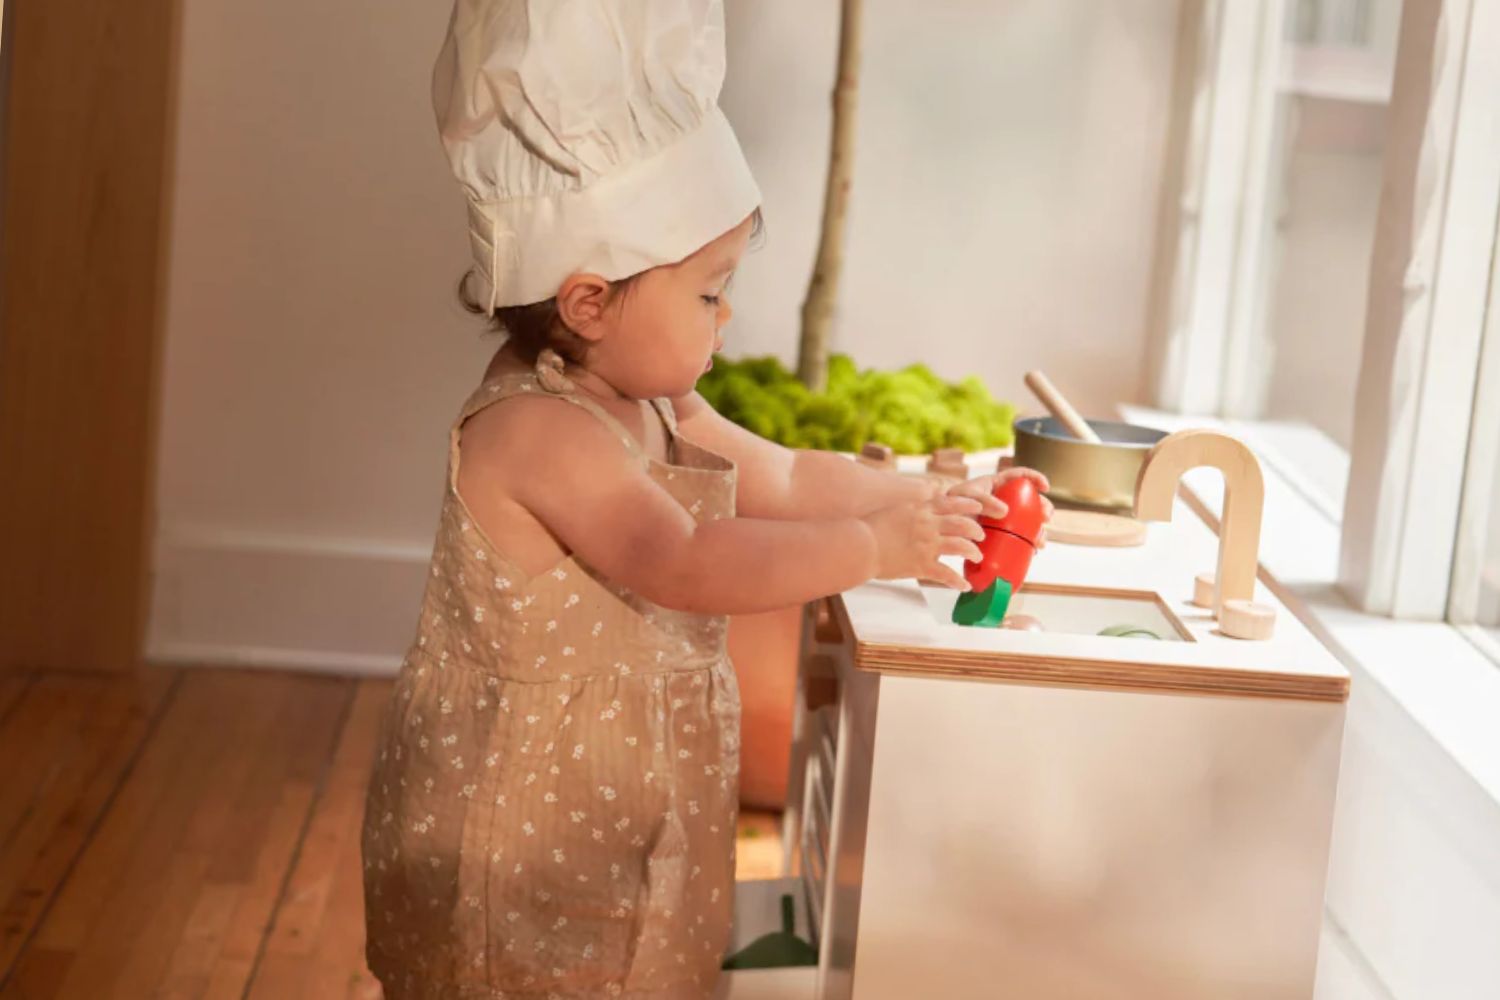 Benefits of Play Kitchens - Why Are Play Kitchens Important for Children